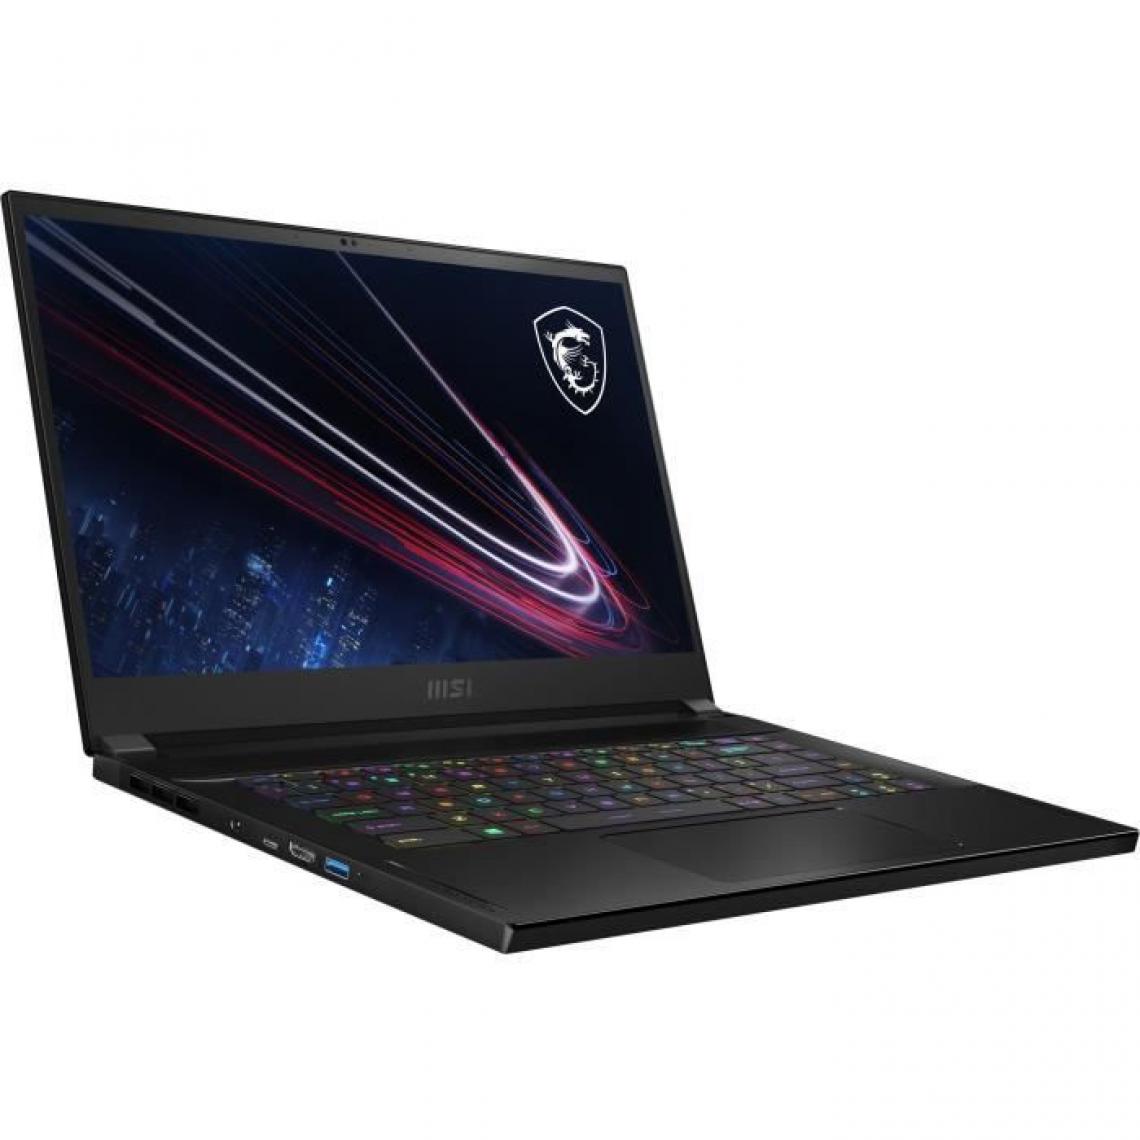 Msi - PC Portable Gamer - MSI - GS66 Stealth 11UG-004FR - 15,6 FHD 360Hz - i7-11800H - 16Go - Stockage 1To SSD - RTX 3070 - W10H - AZERTY - PC Portable Gamer